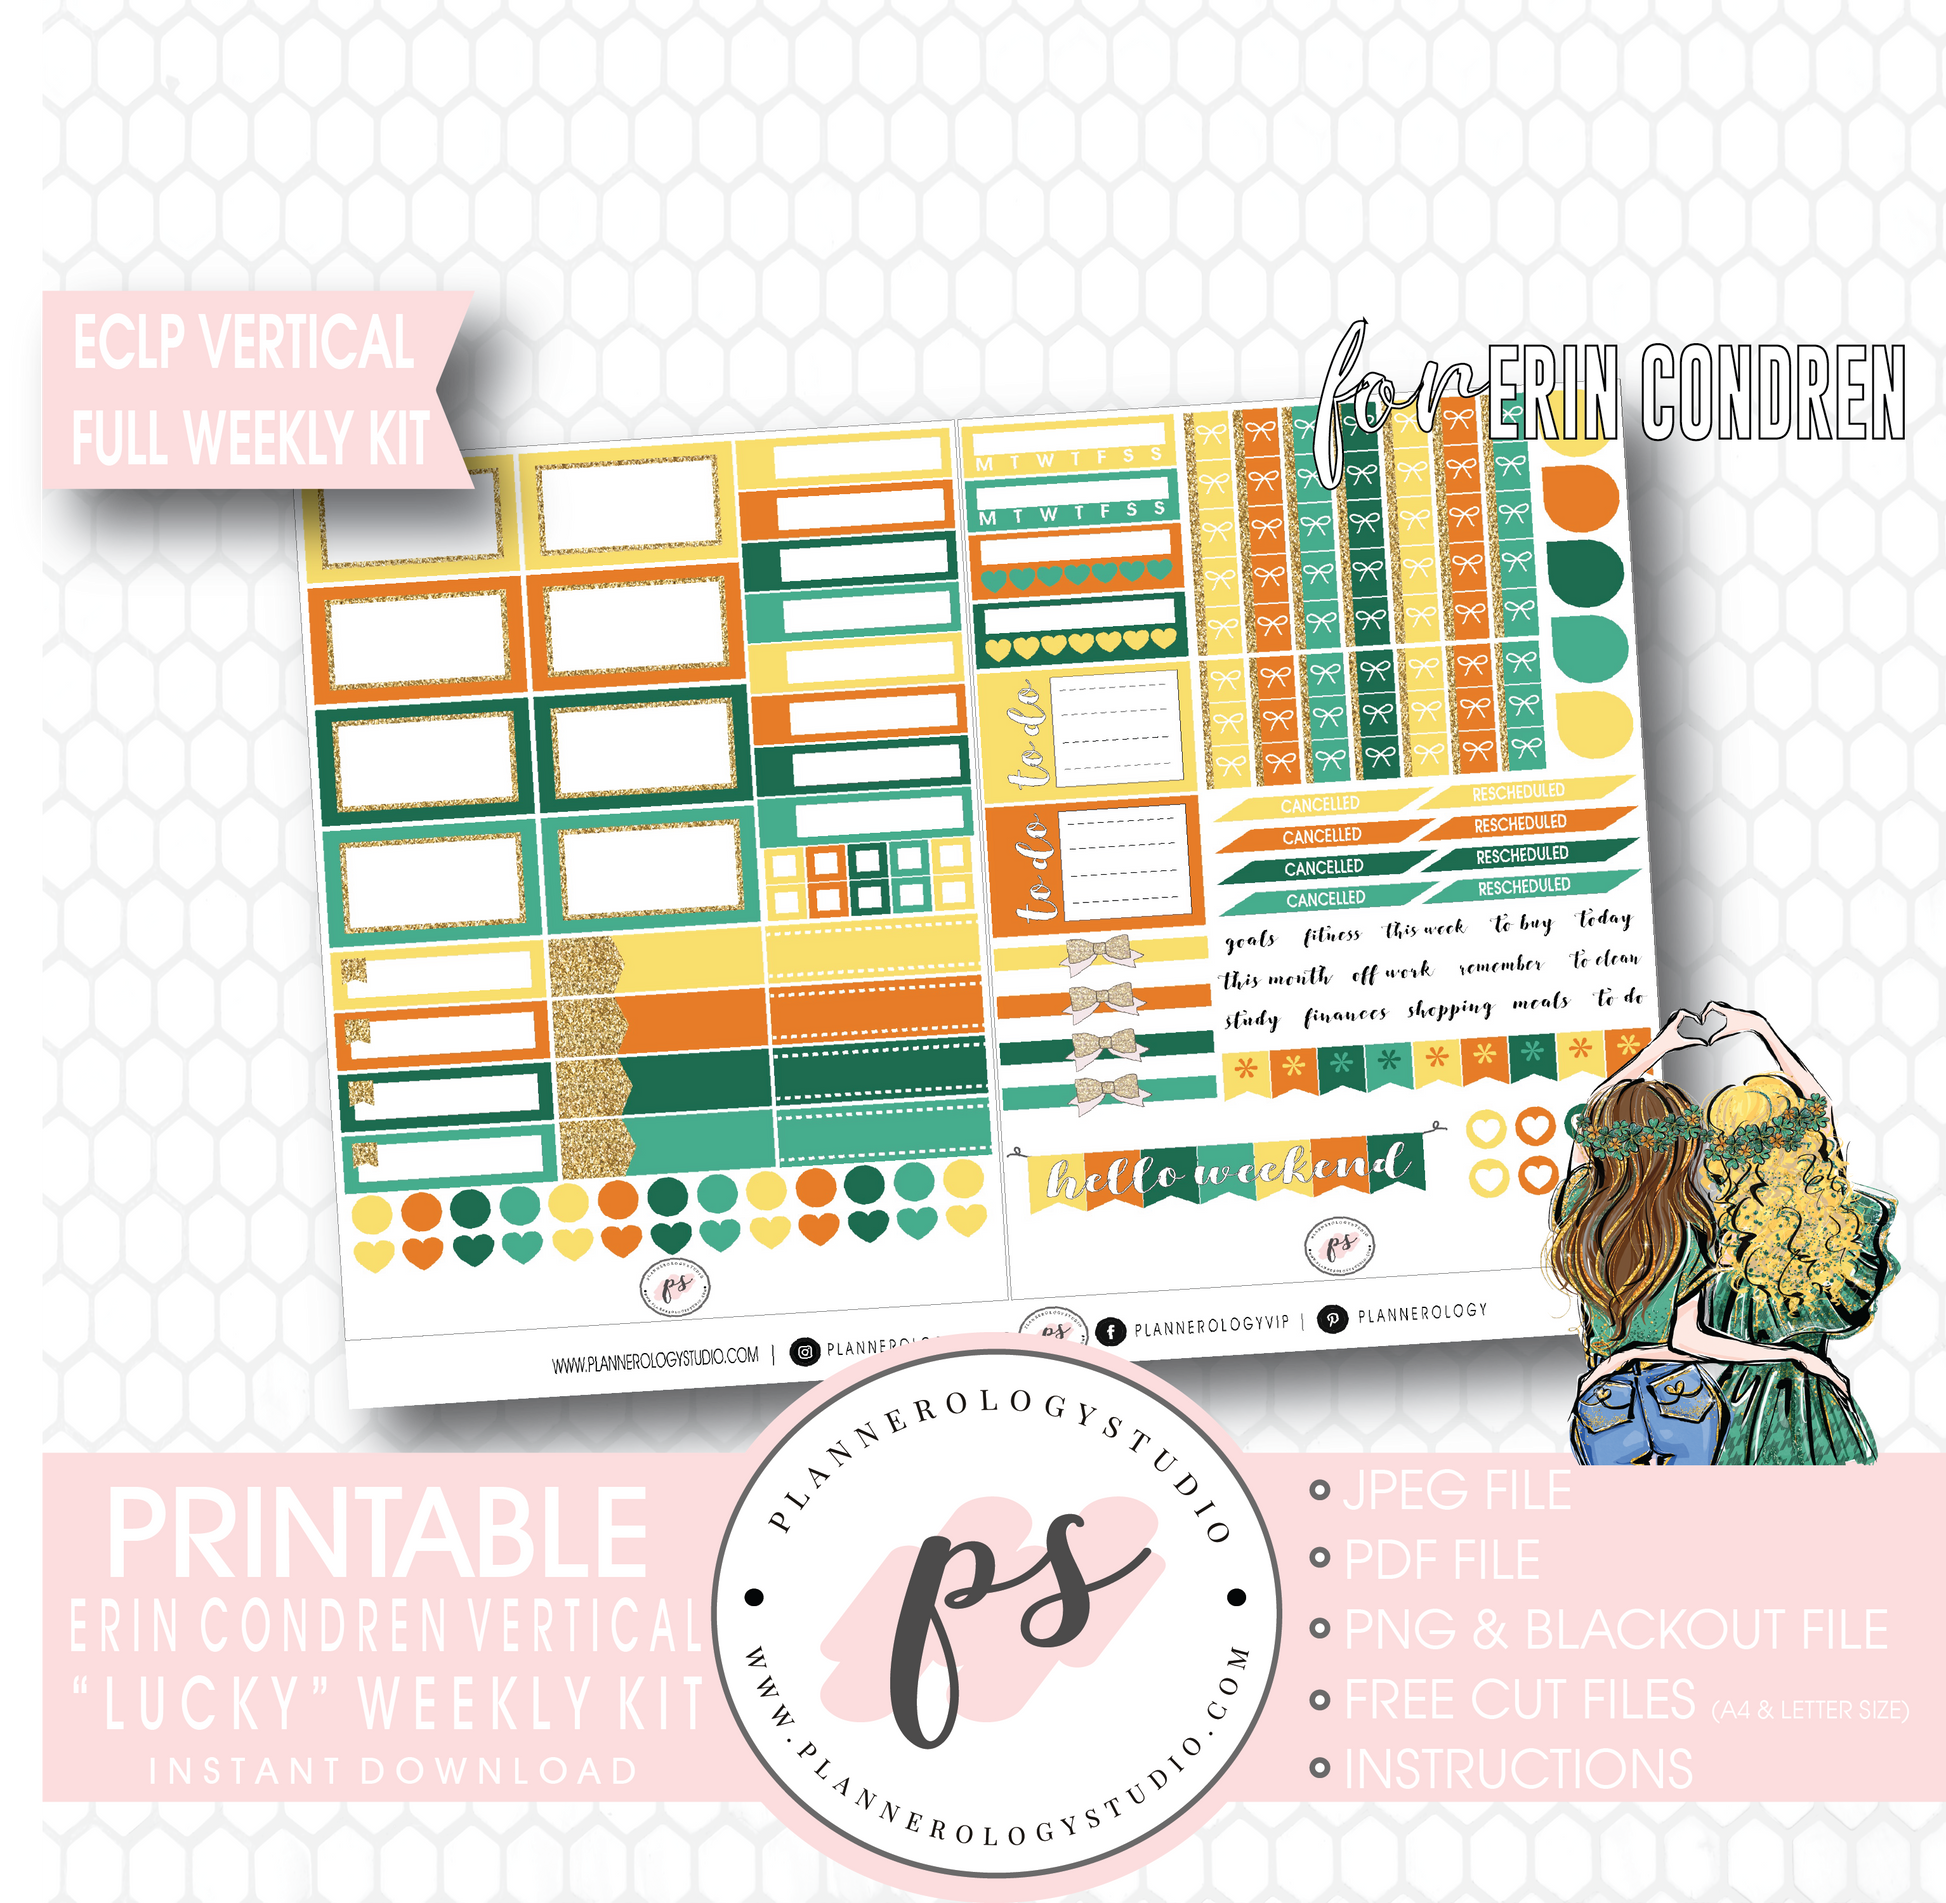 Lucky (St Patrick's Day) Full Weekly Kit Printable Planner Digital Stickers (for use with Erin Condren Vertical) - Plannerologystudio